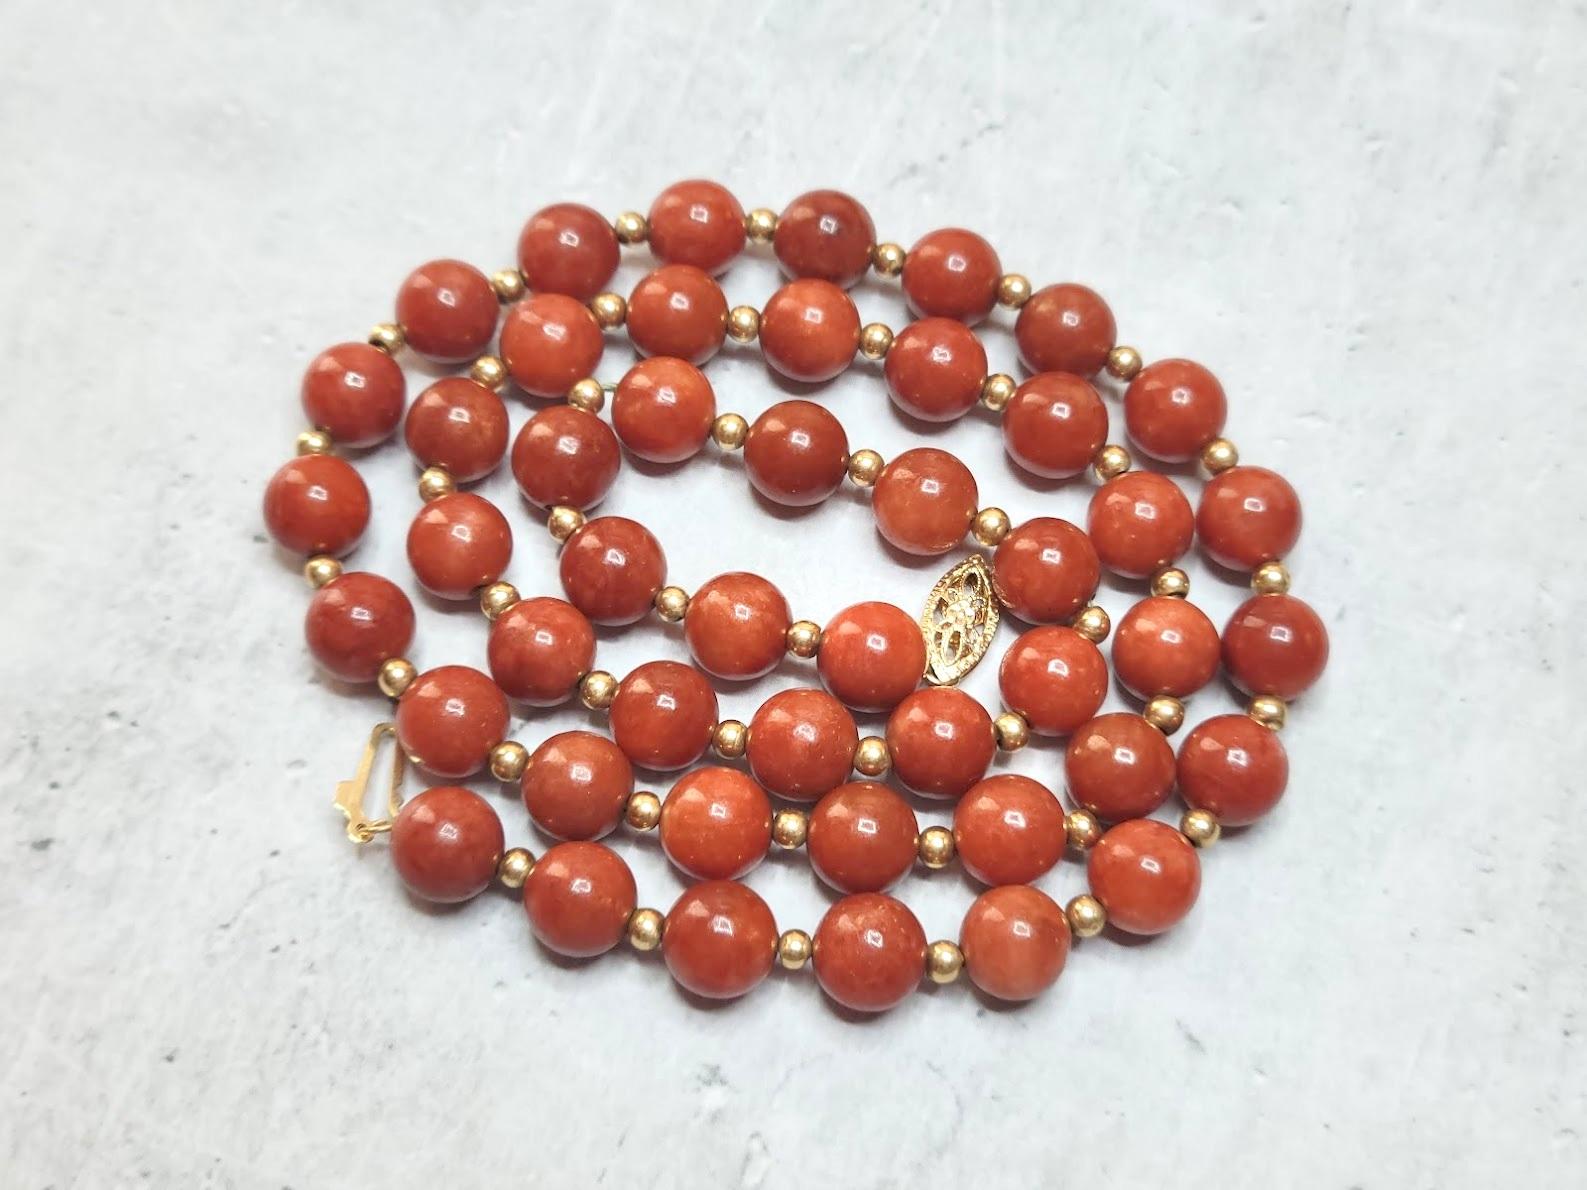 From an estate collection. Extremely Rare! Natural red jade beads are very rare and hard to come by.

The jade beads on this necklace are undyed natural red jades of excellent quality. The jade has a vivid, rusty, saturated color throughout its